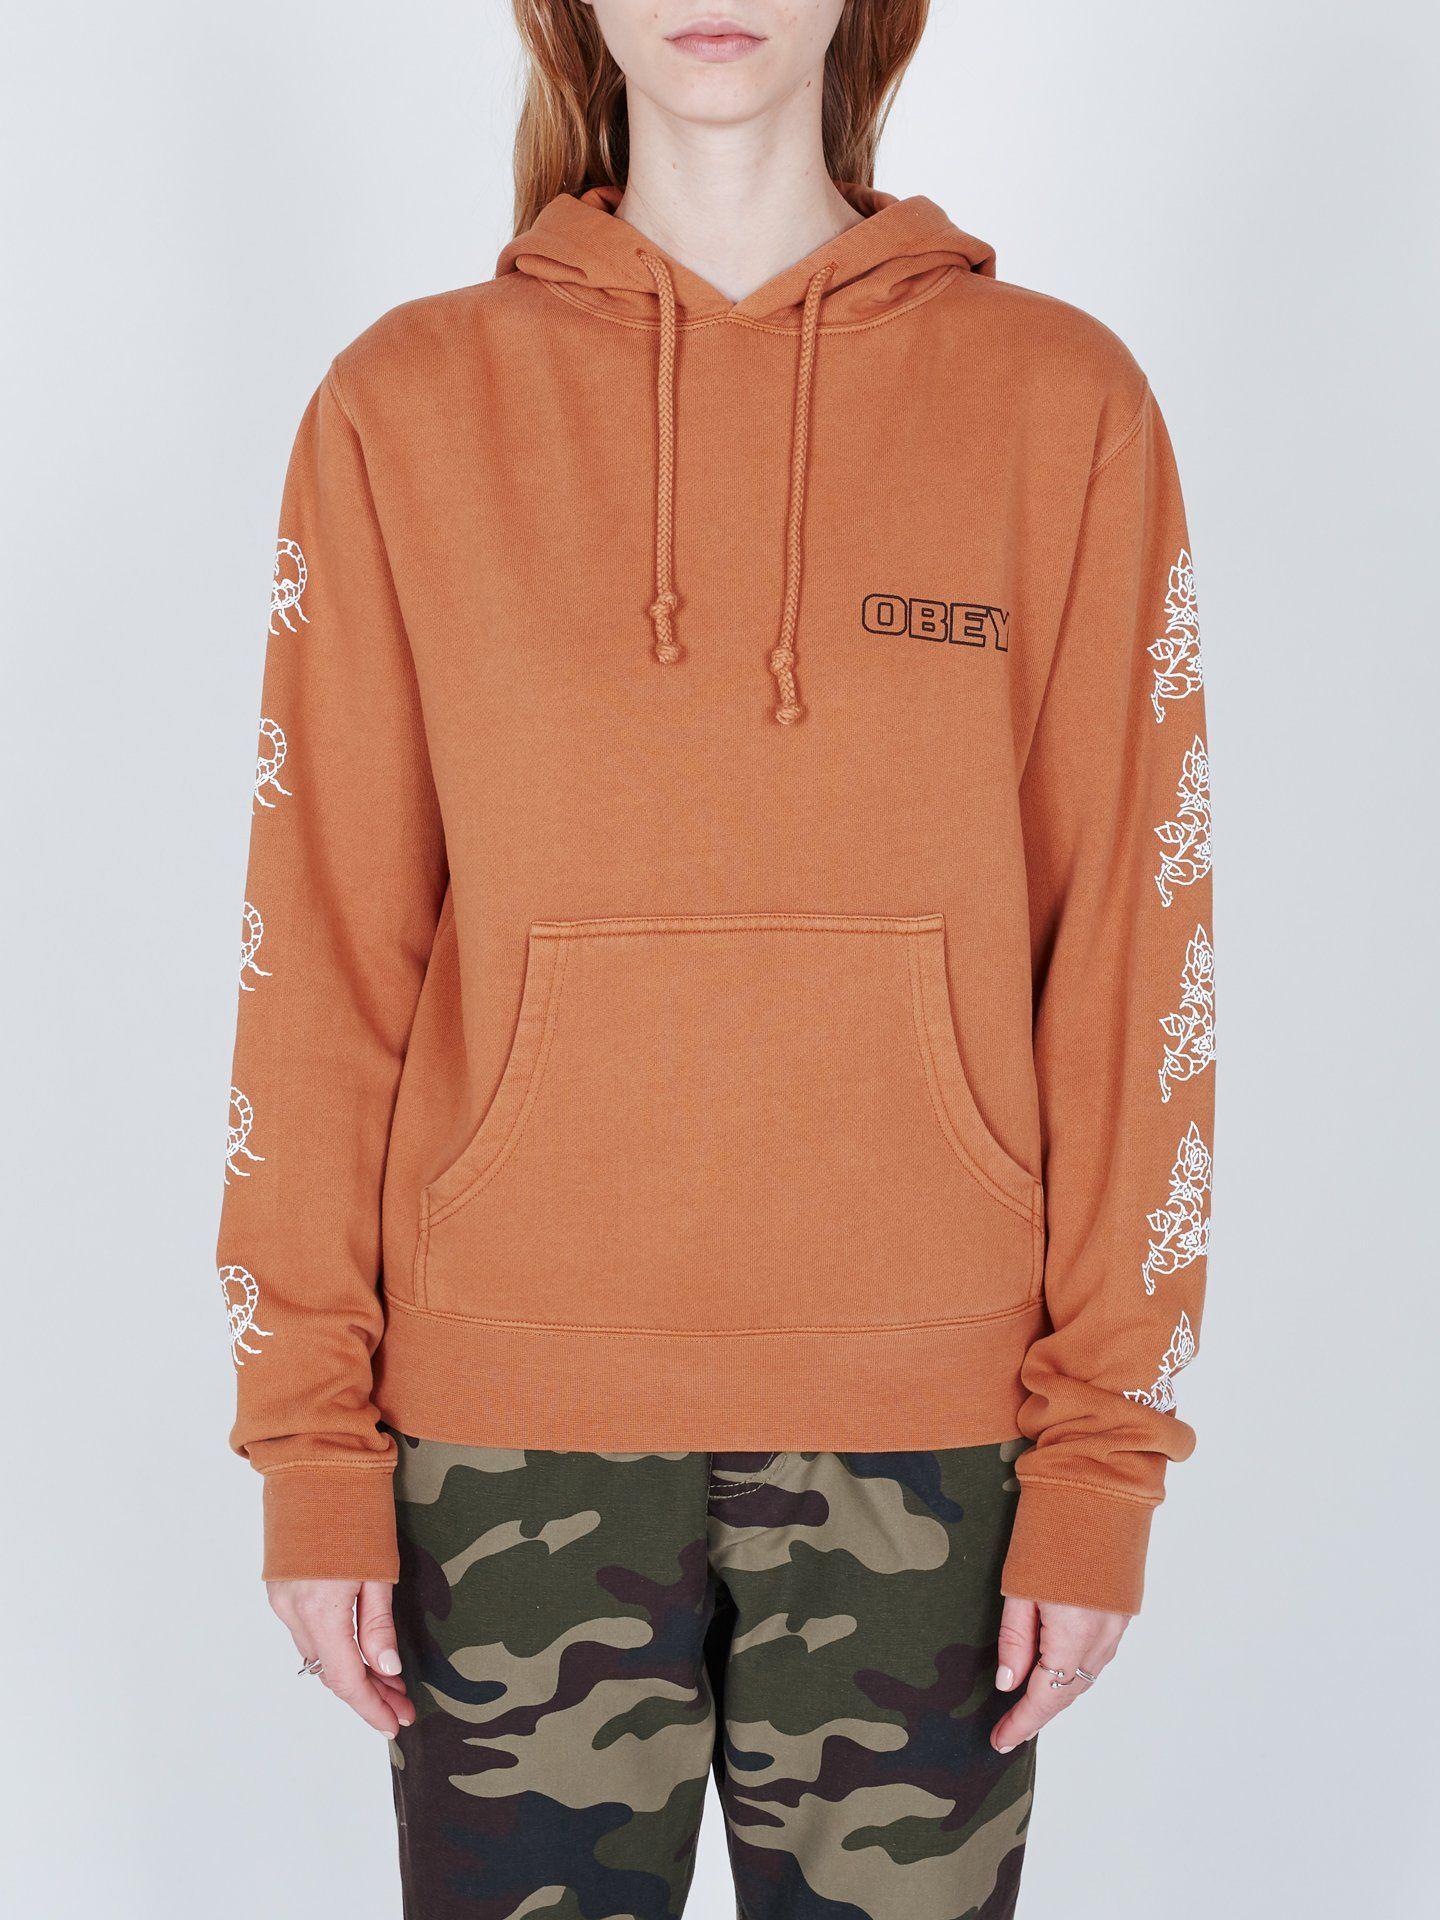 OBEY Clothing Rose Logo - Scorpion Rose Box Pigment Pullover. OBEY Clothing. online shopping